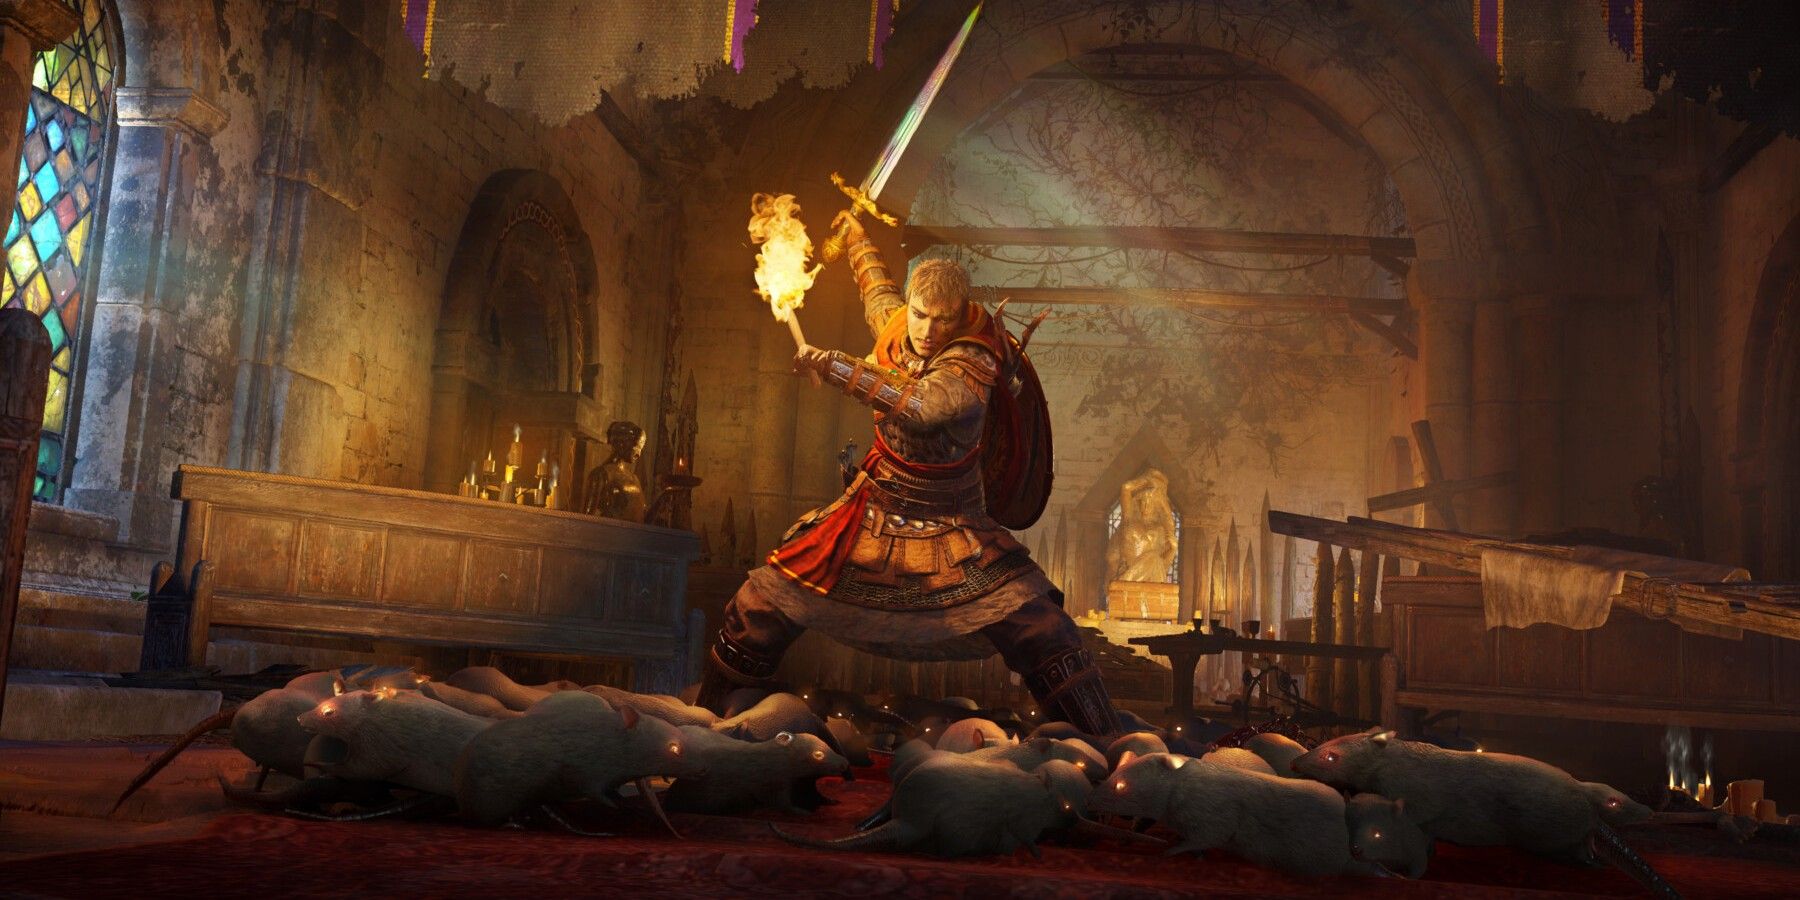 Eivor wielding a torch and a sword in Assassin's Creed: Valhalla